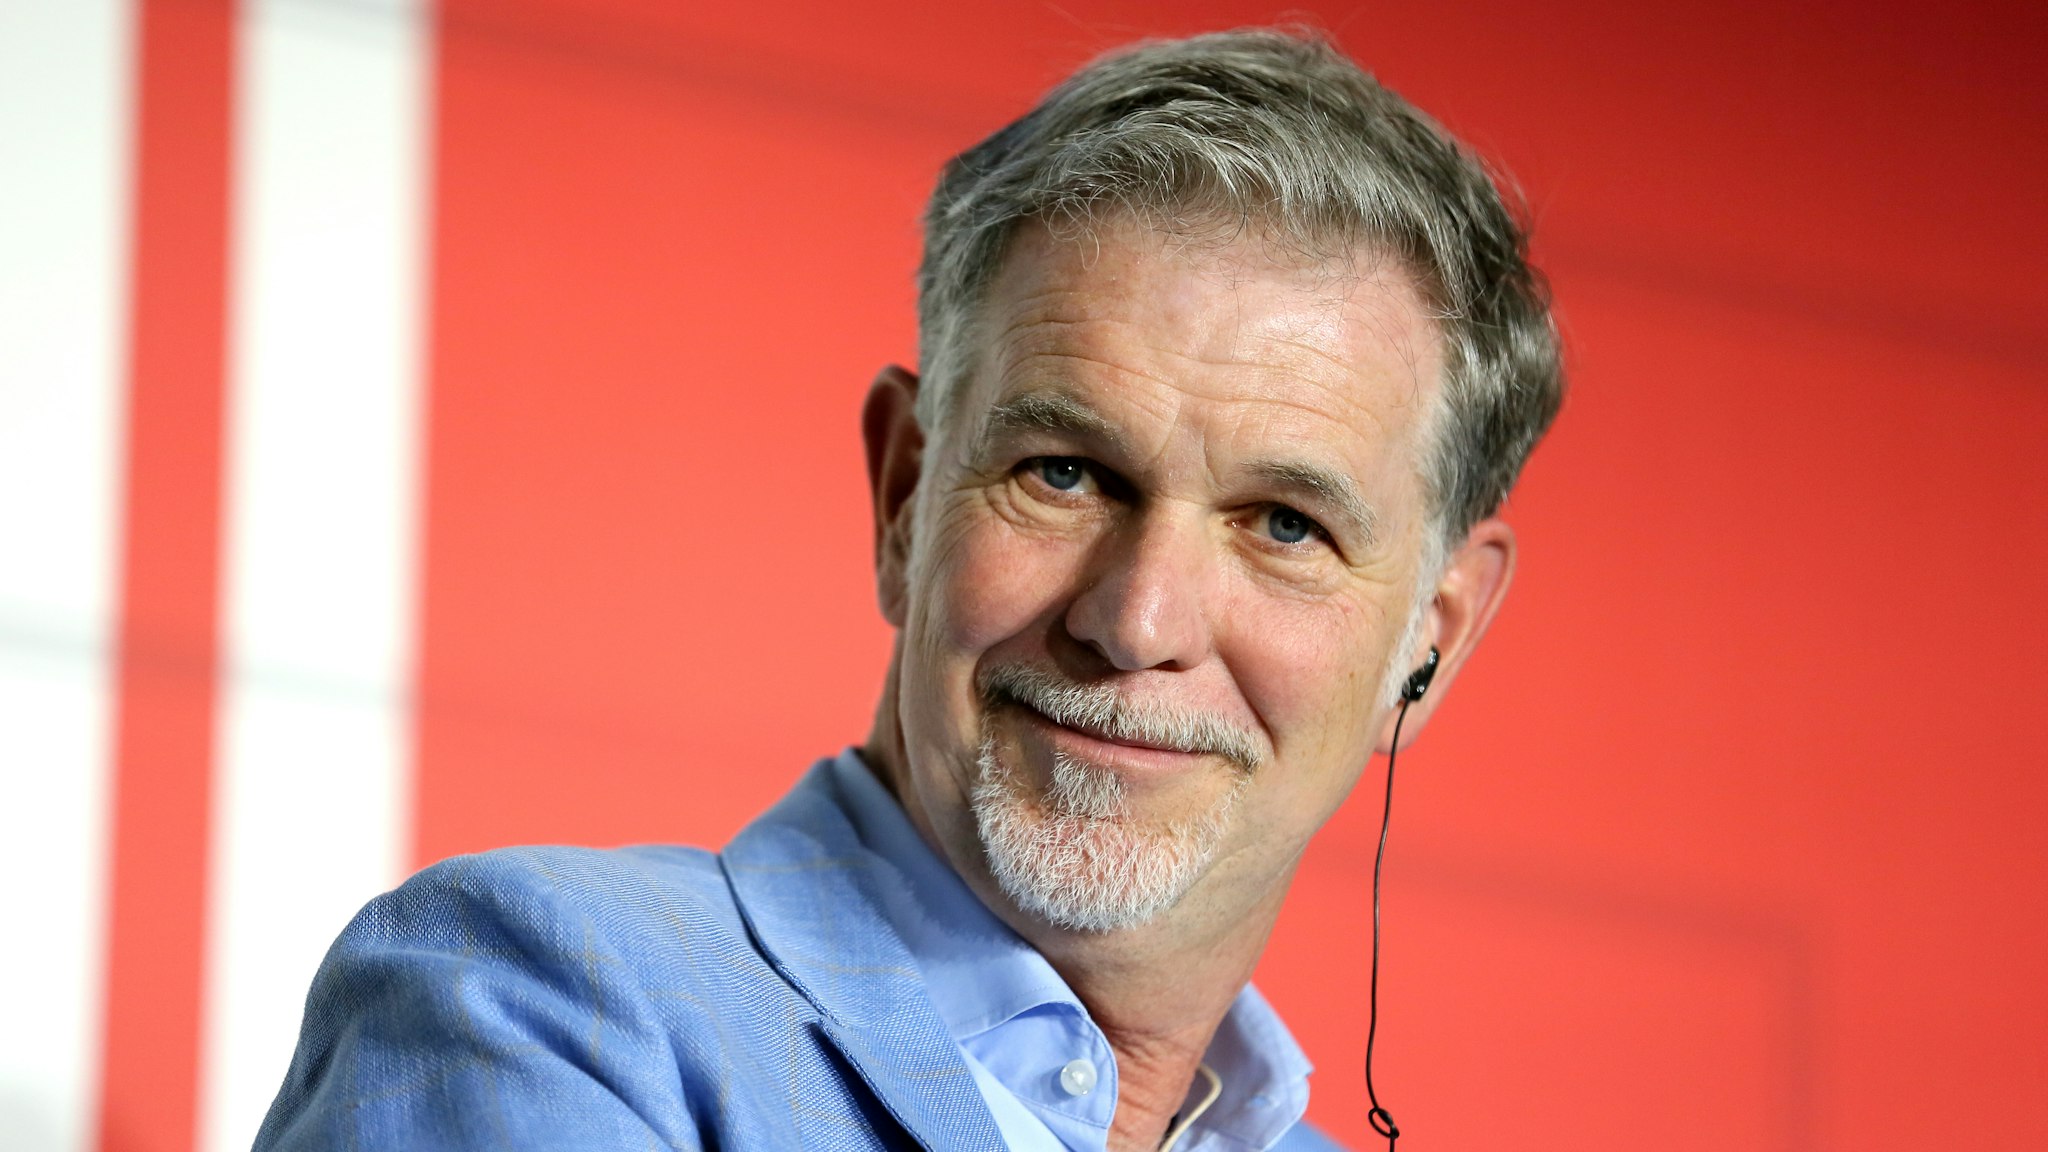 ROME, ITALY - OCTOBER 08: Reed Hastings attends the Netflix & Mediaset Partnership Announcement, Rome, 8th October 2019. (Photo by Ernesto S. Ruscio/Getty Images / Netflix)